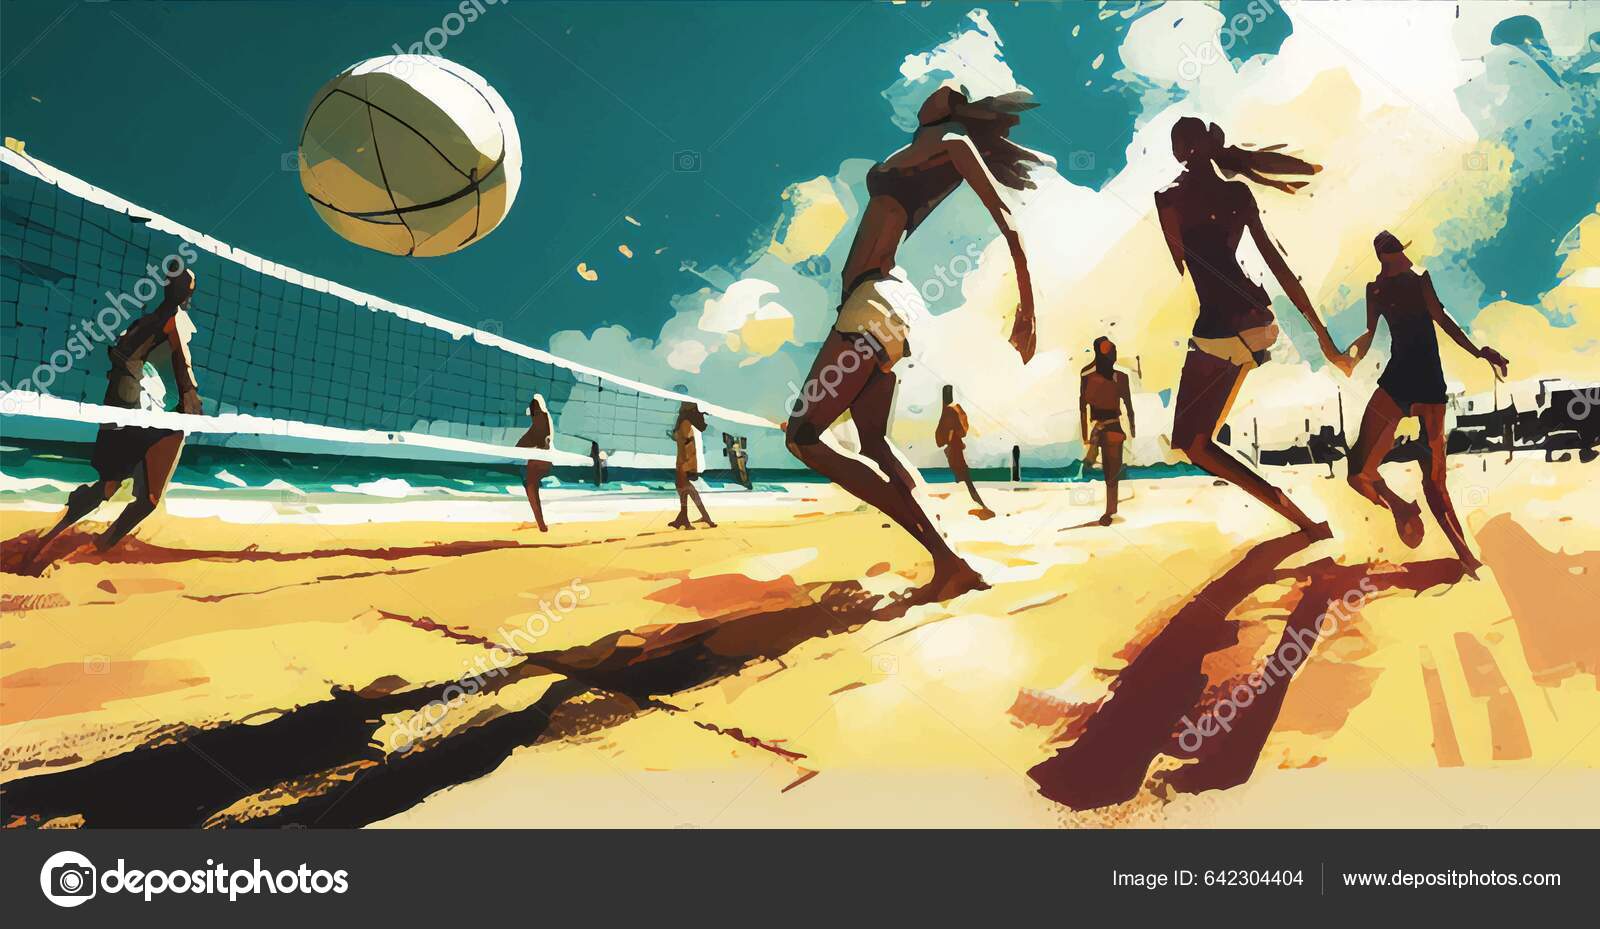 100,000 Volley beach Vector Images